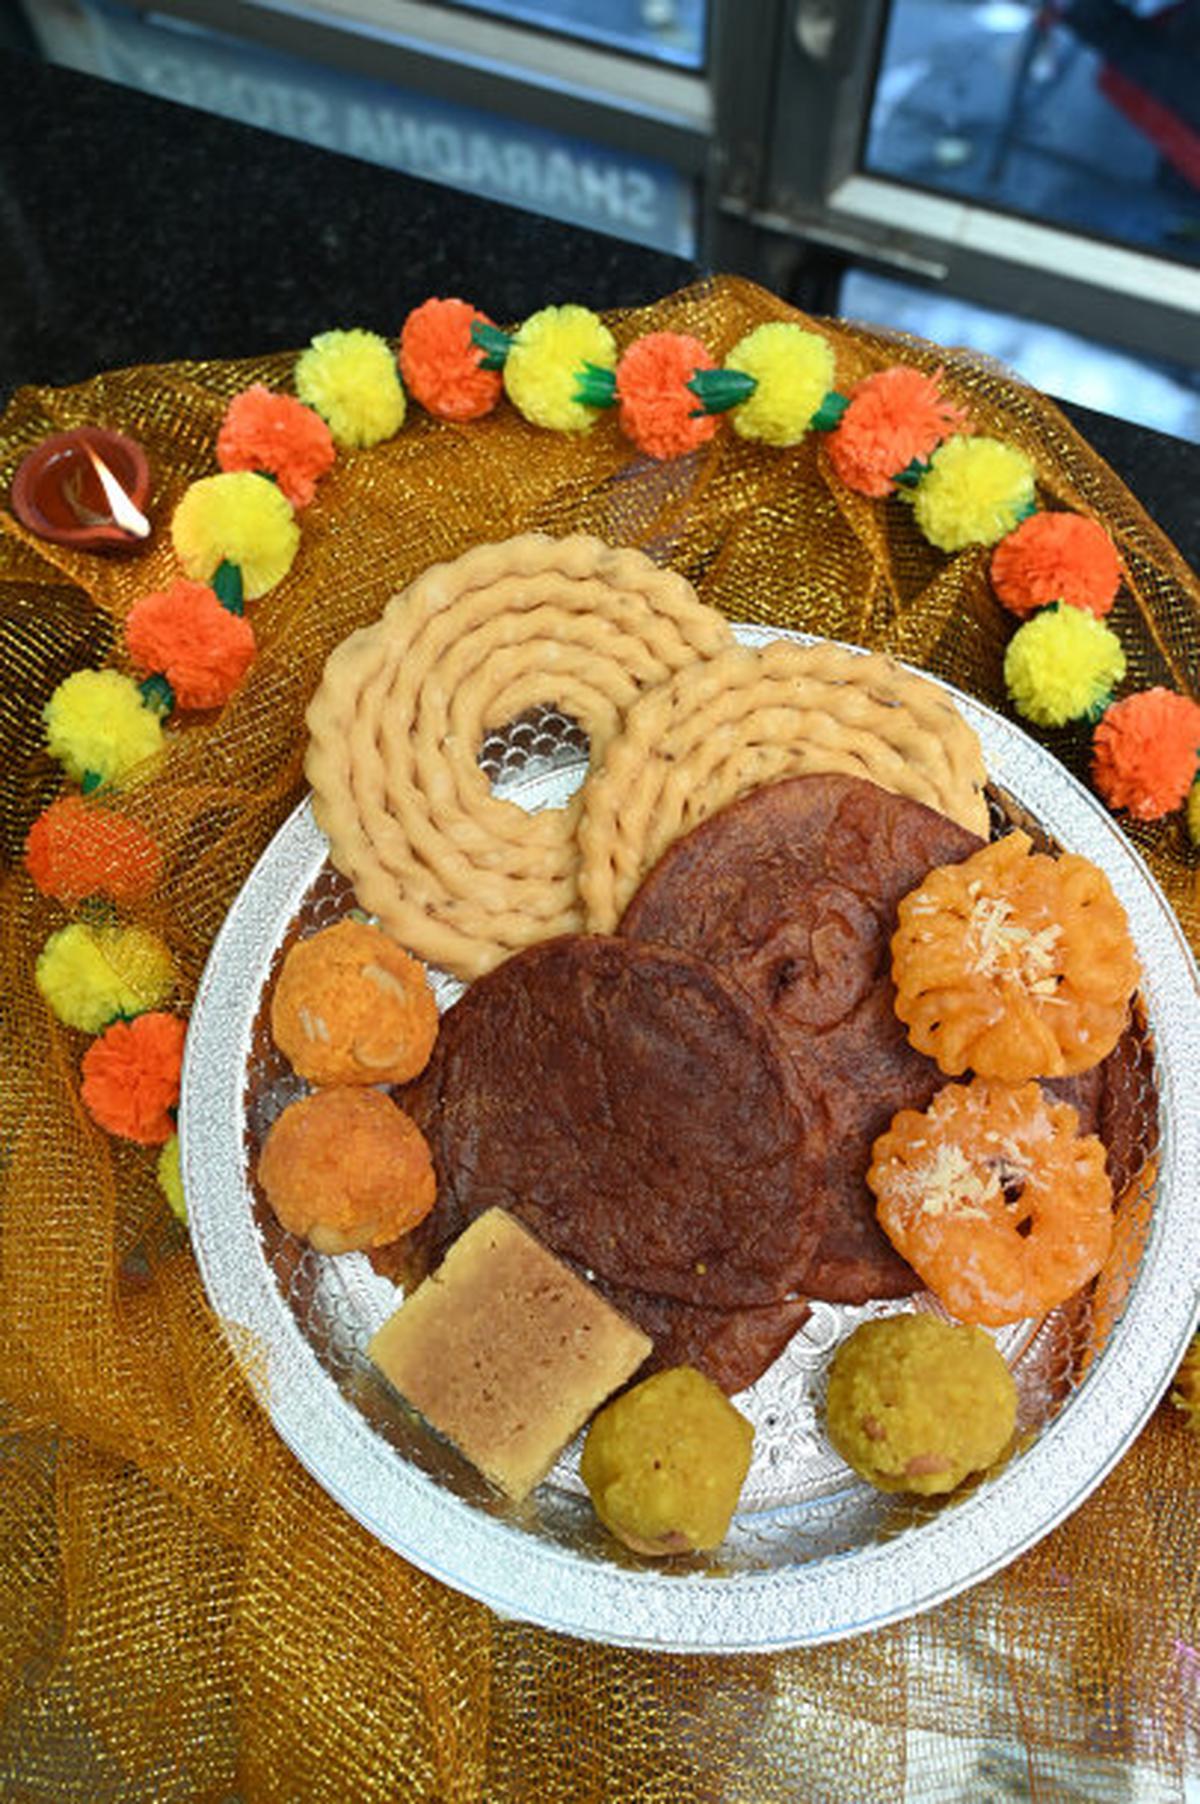 Sri Sastha Catering Services offers traditional sweets and savories 